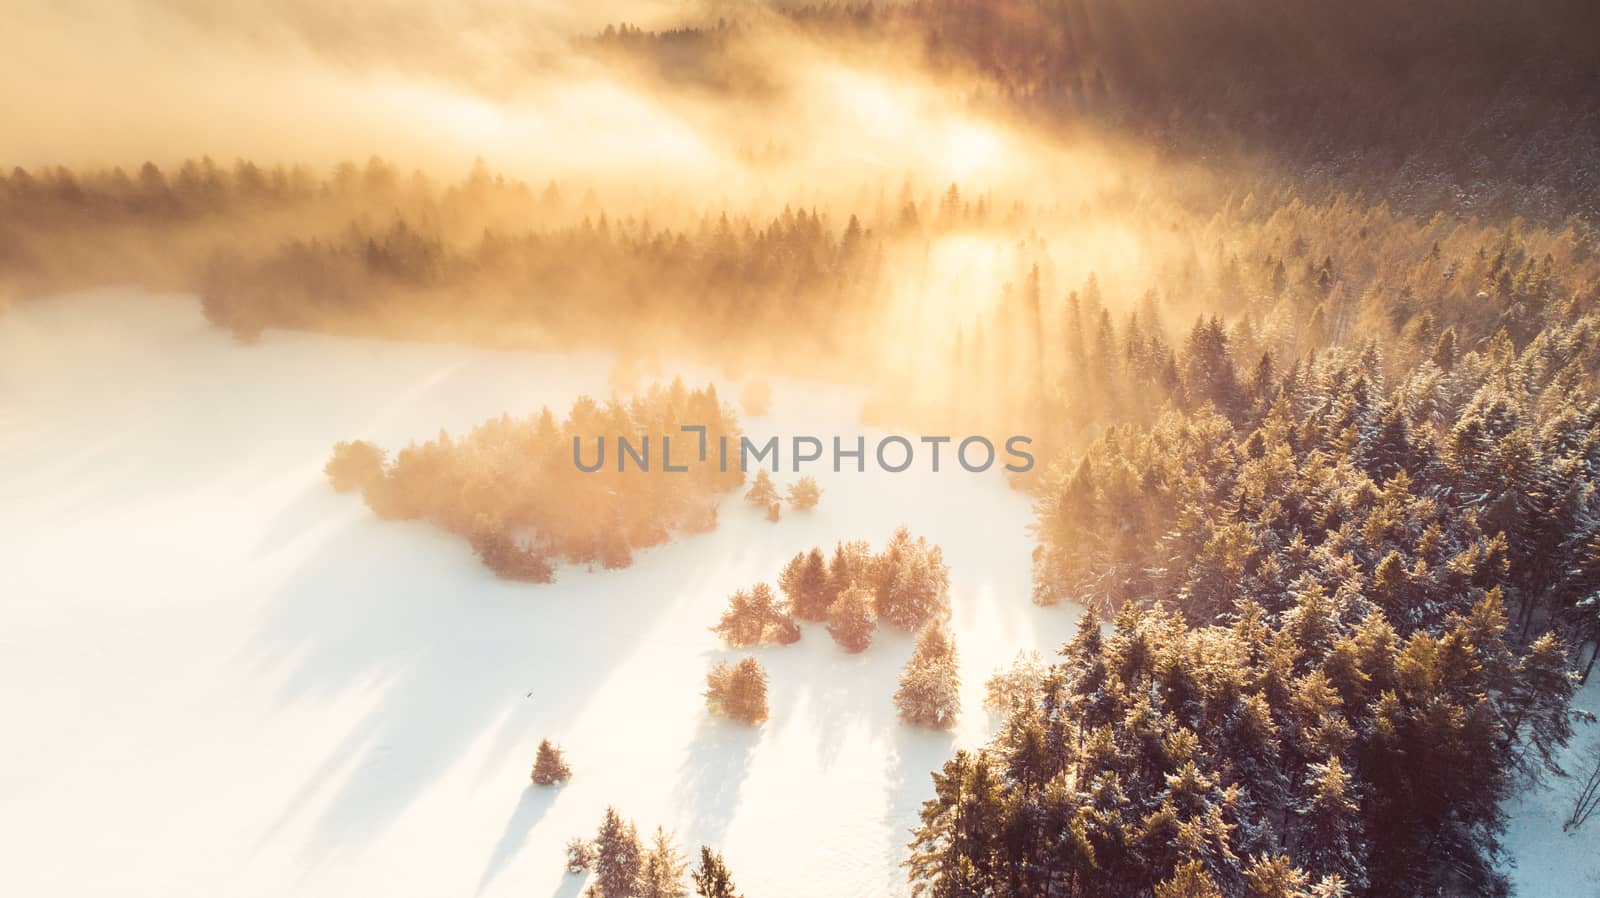 Fog over Pine Trees Covered in Snow at Cold Sunrise in Winter. A by merc67